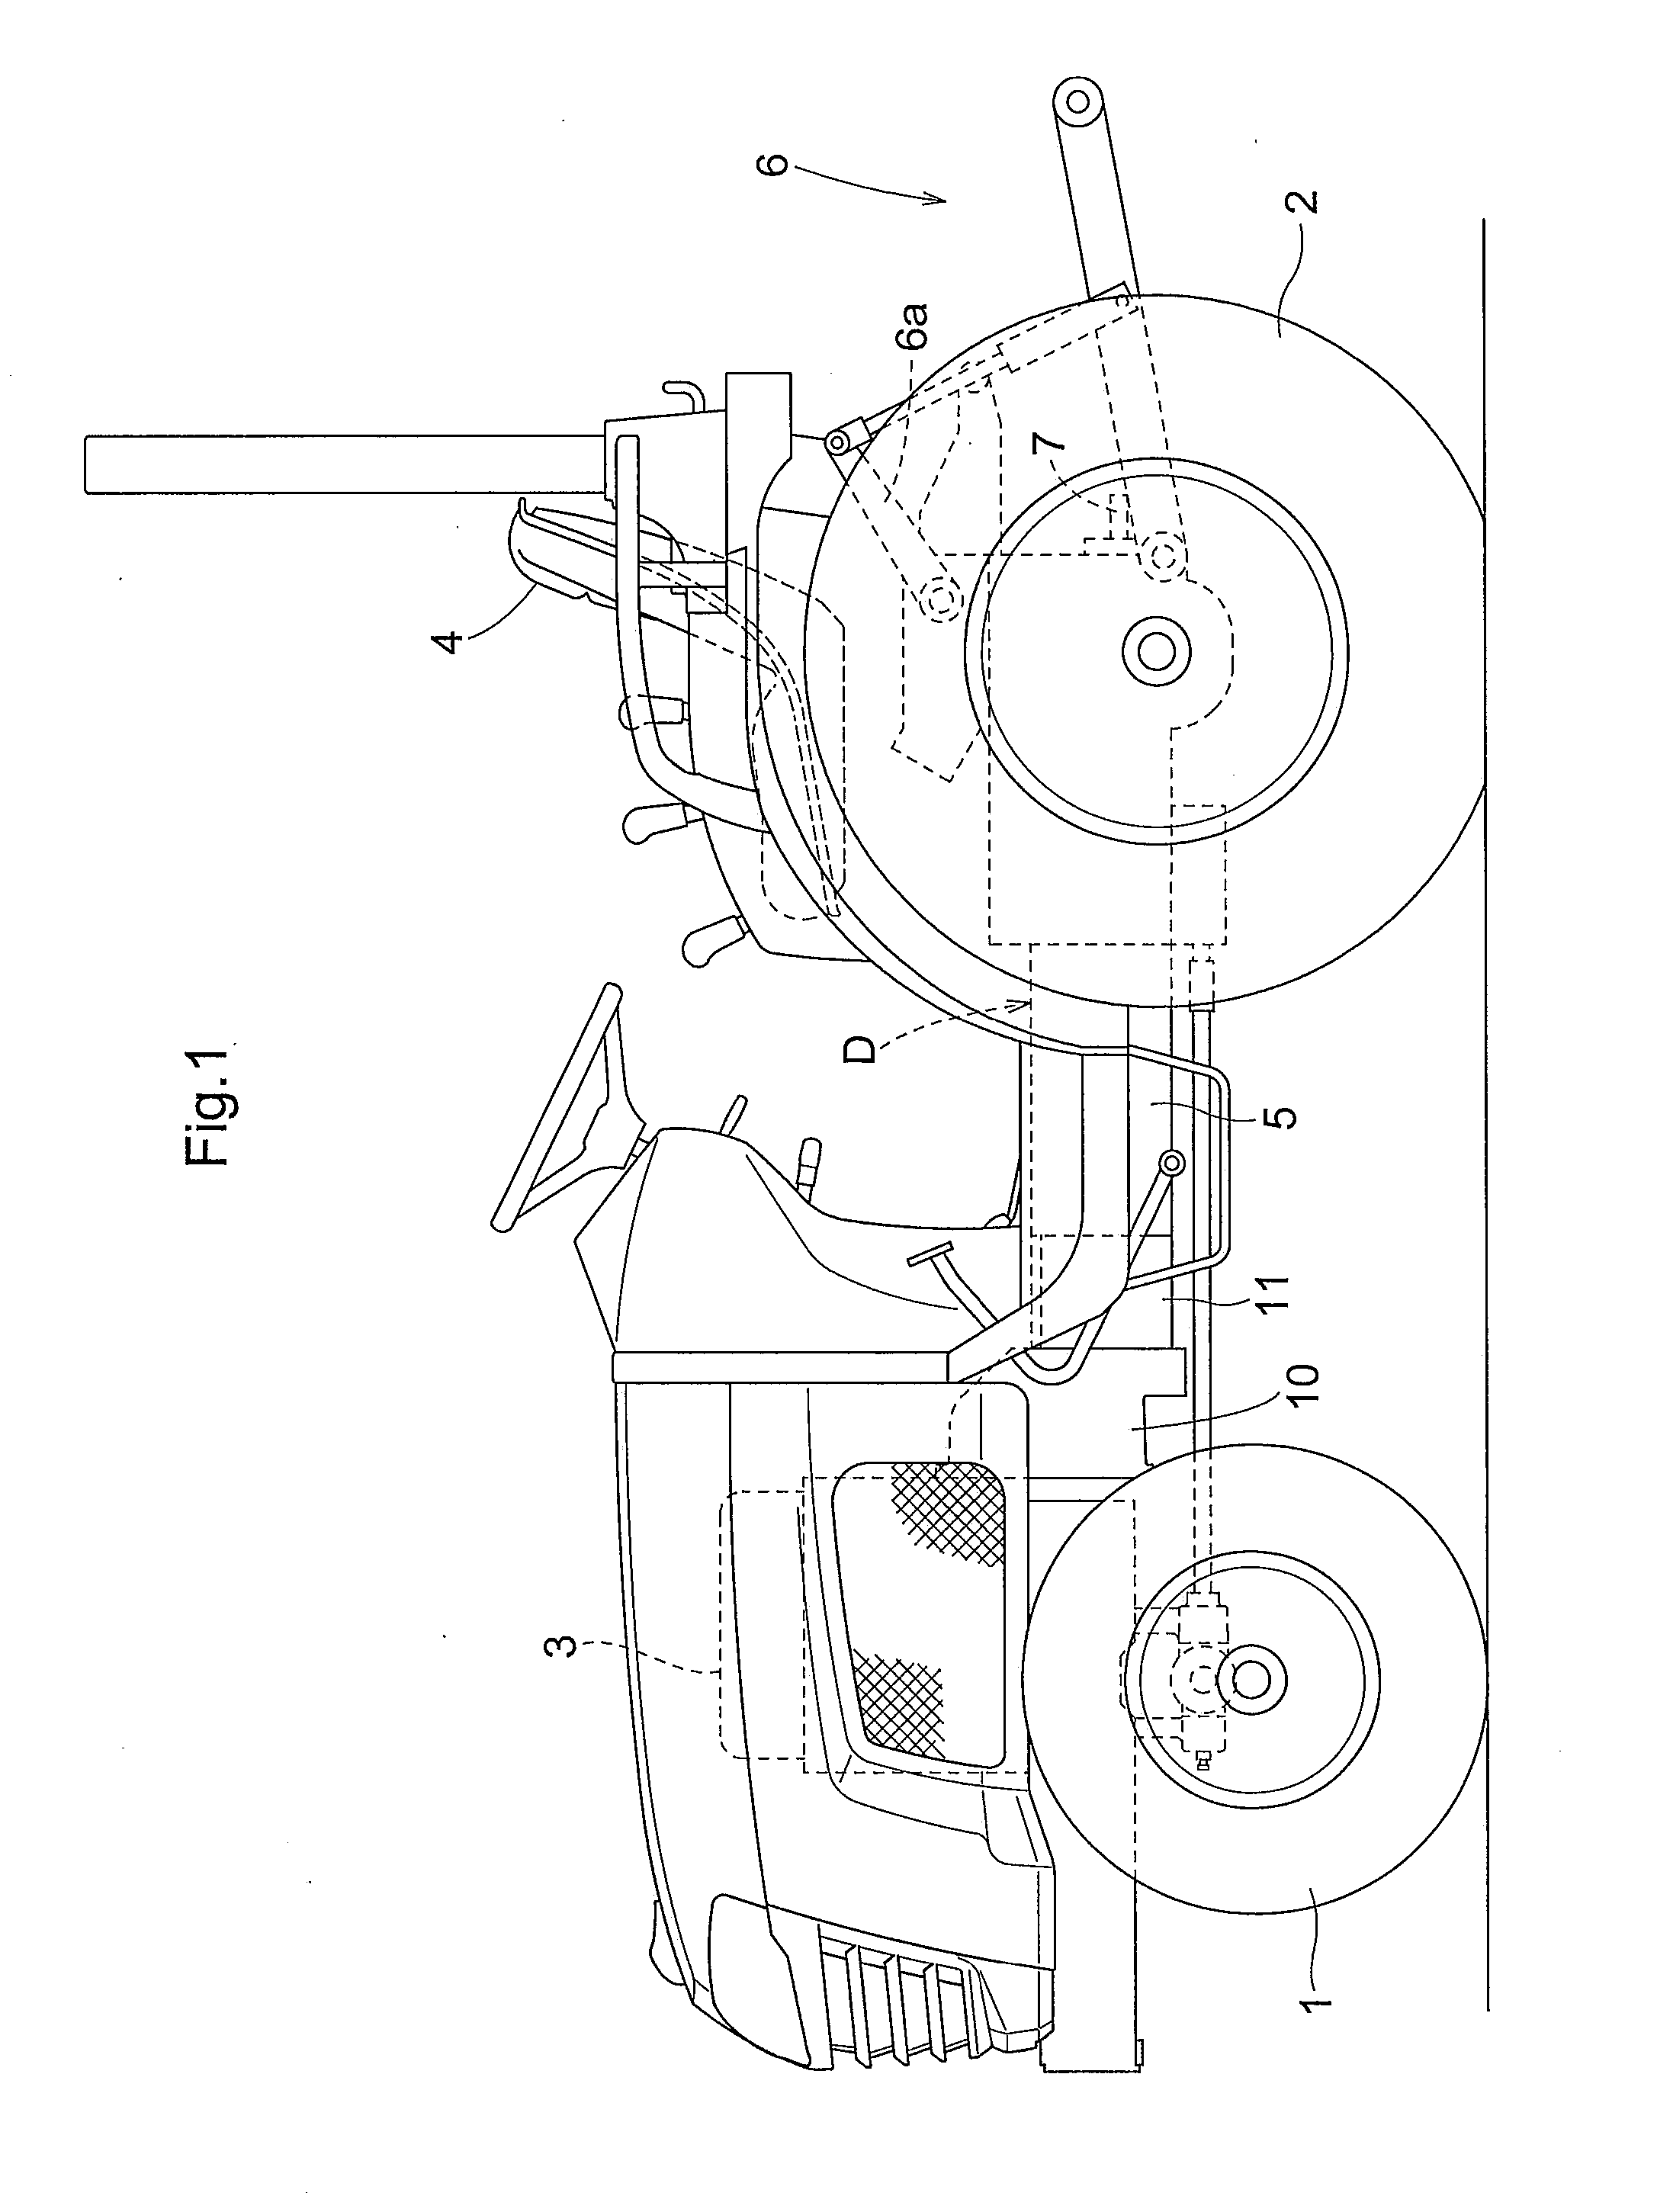 Transmission Apparatus for a Tractor